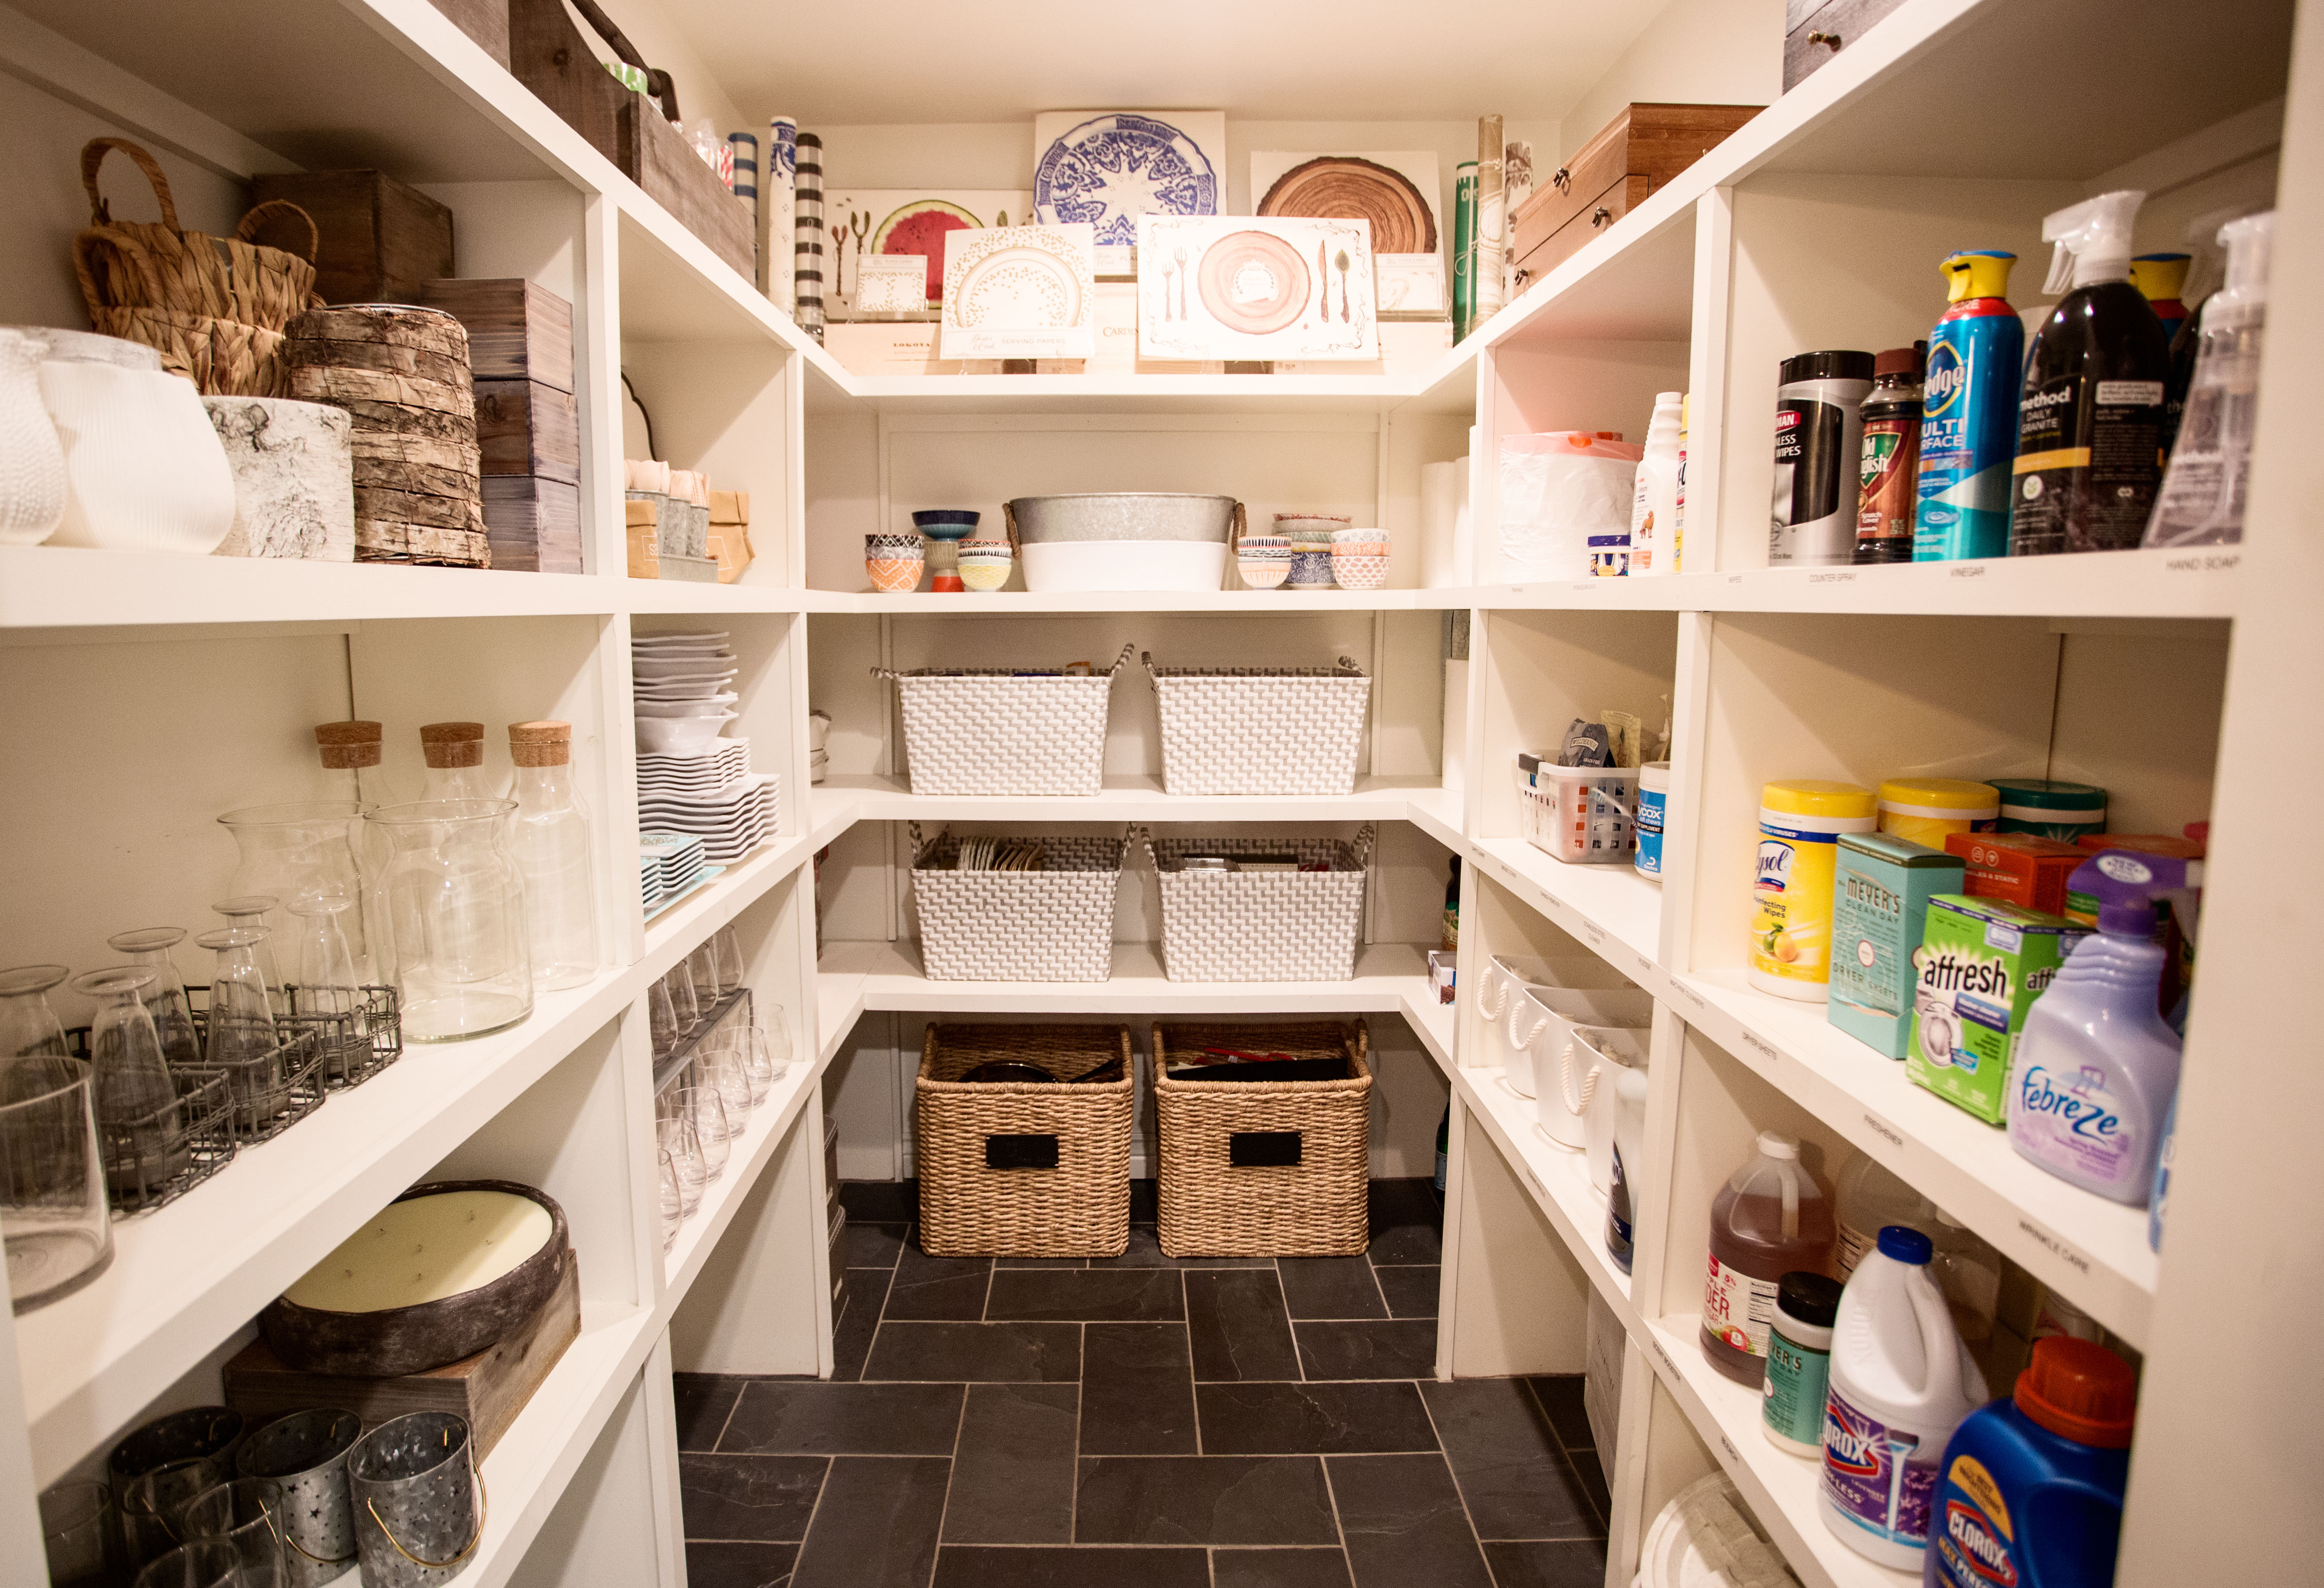 My 2019 Resolution: The Year of Pantry Organization